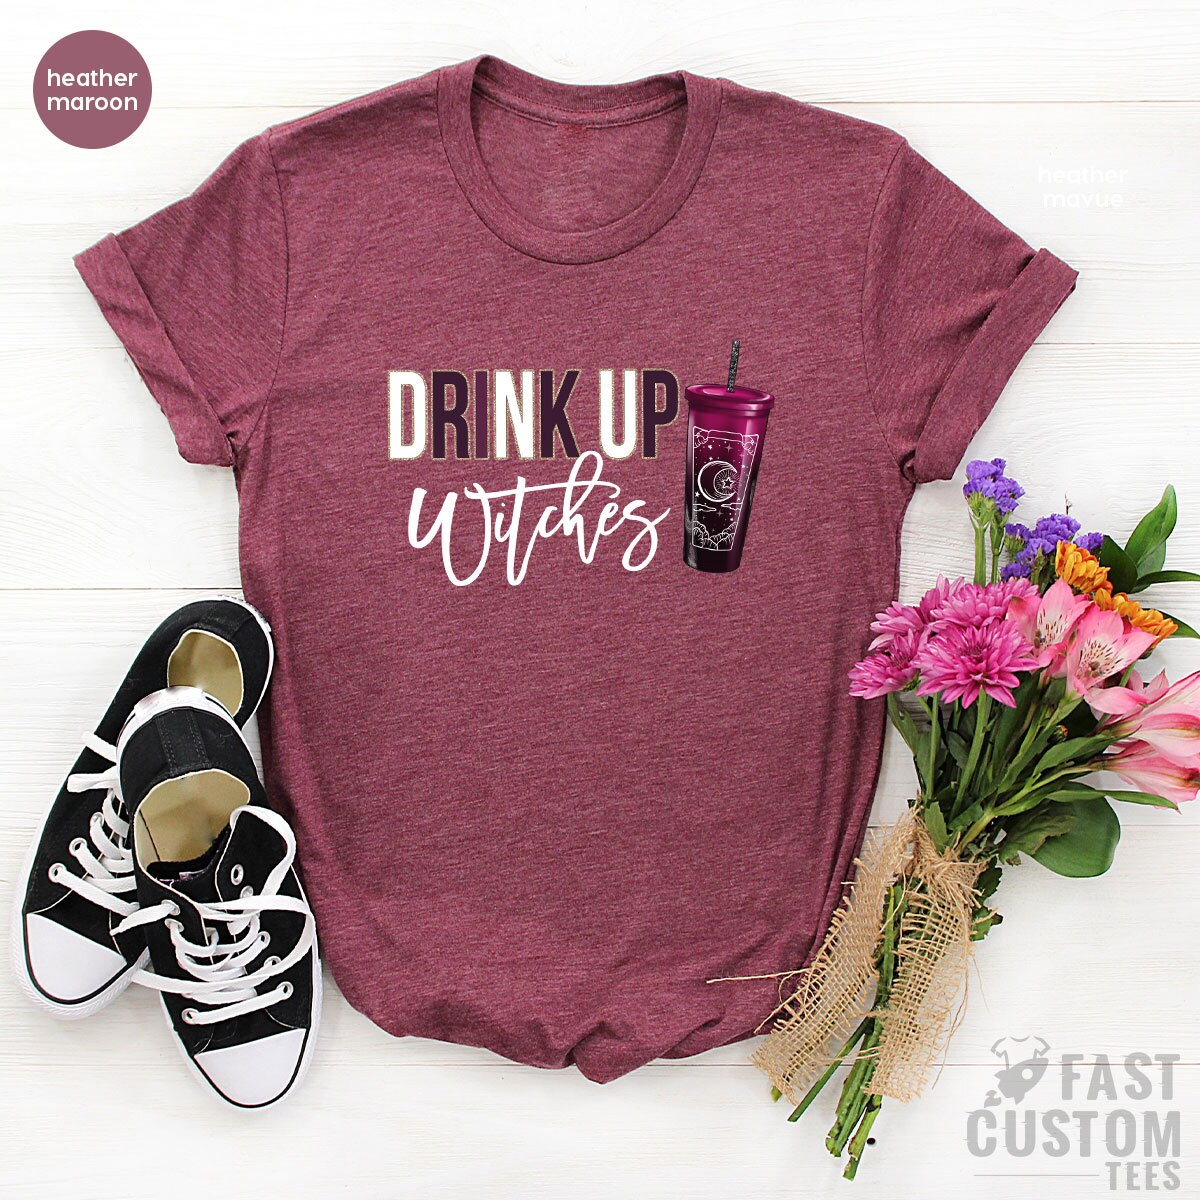 Drink Up Witches Shirt, Witch T-Shirt, Funny Halloween Shirt, Halloween Drinking Shirt, Gifts For Halloween, Coffee Lover Shirt, Fall Tshirt - Fastdeliverytees.com